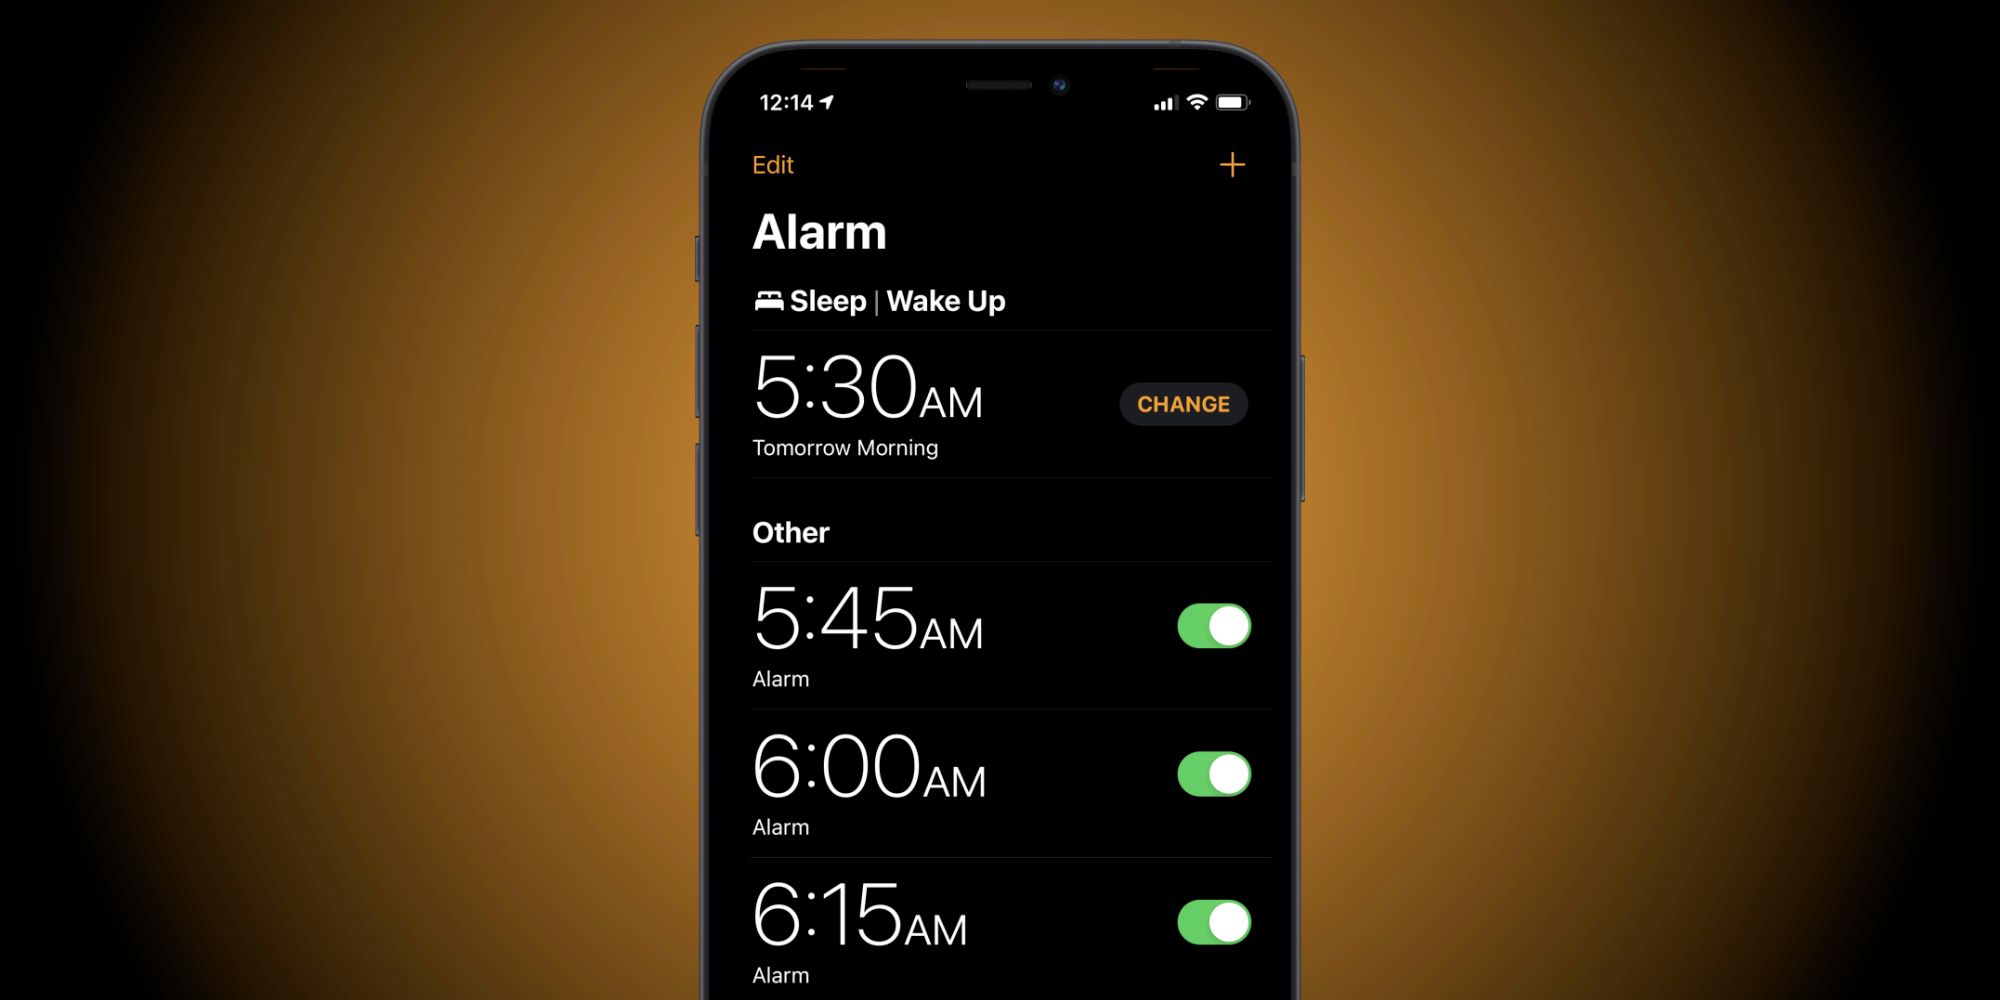 Alarm section in the iPhone Clock app